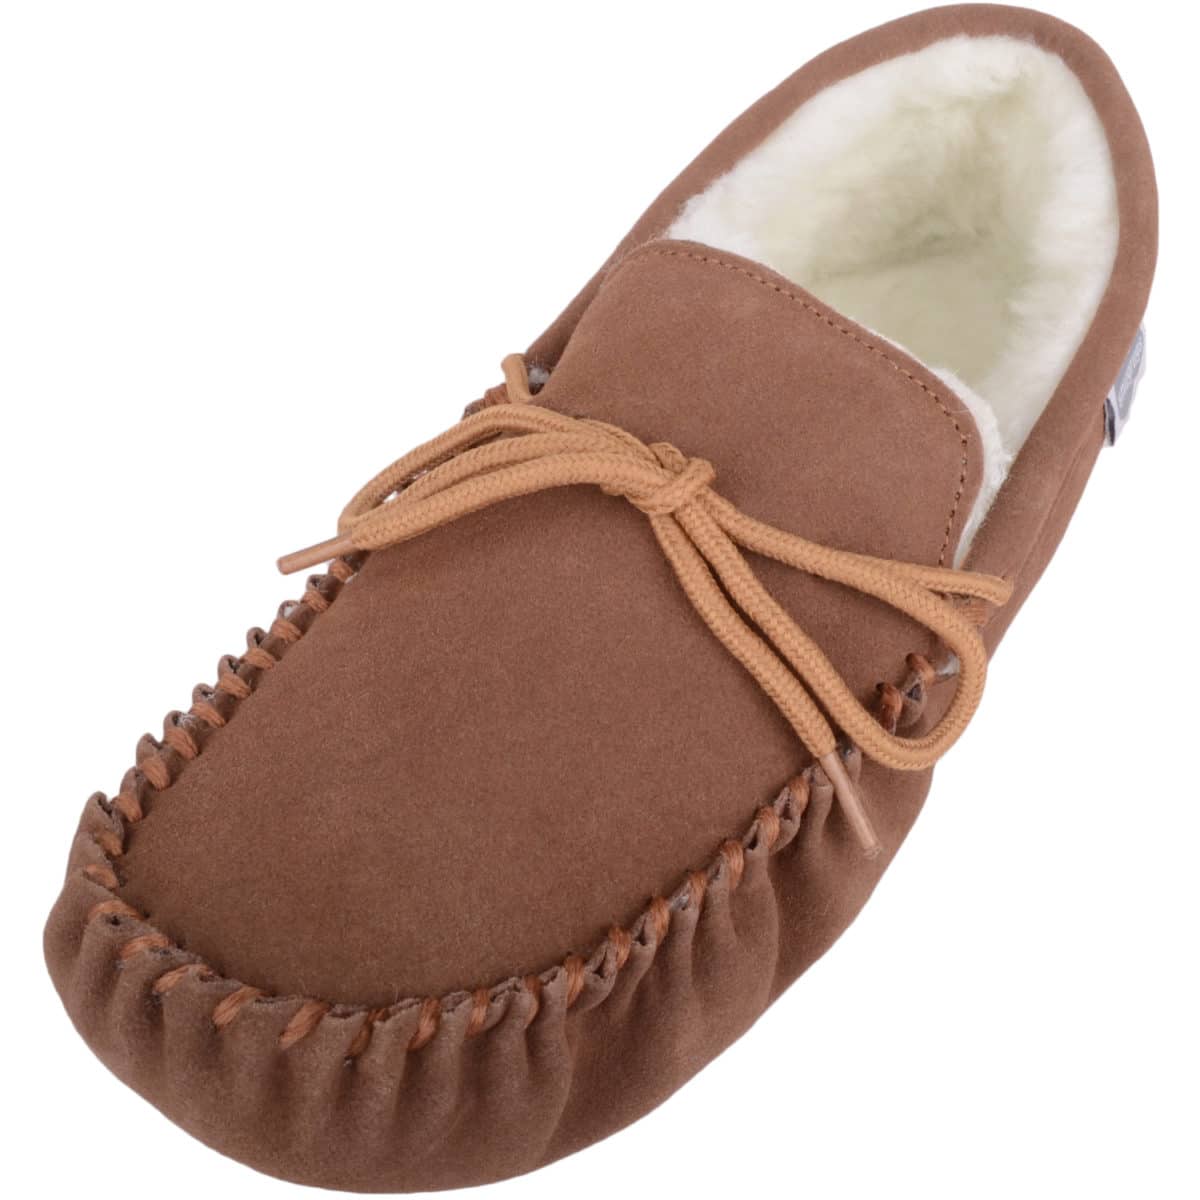 moccasins without soles